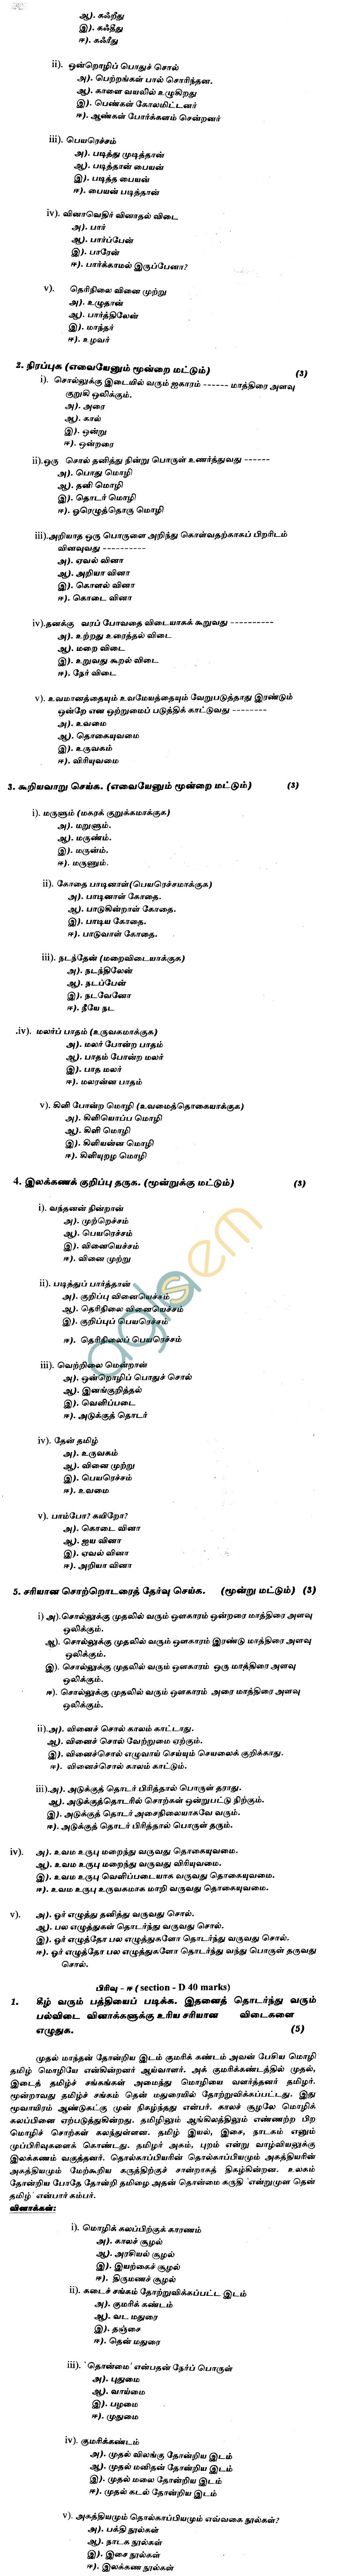 CBSE Board Exam 2013 Sample Papers (SA1) Class X - Tamil